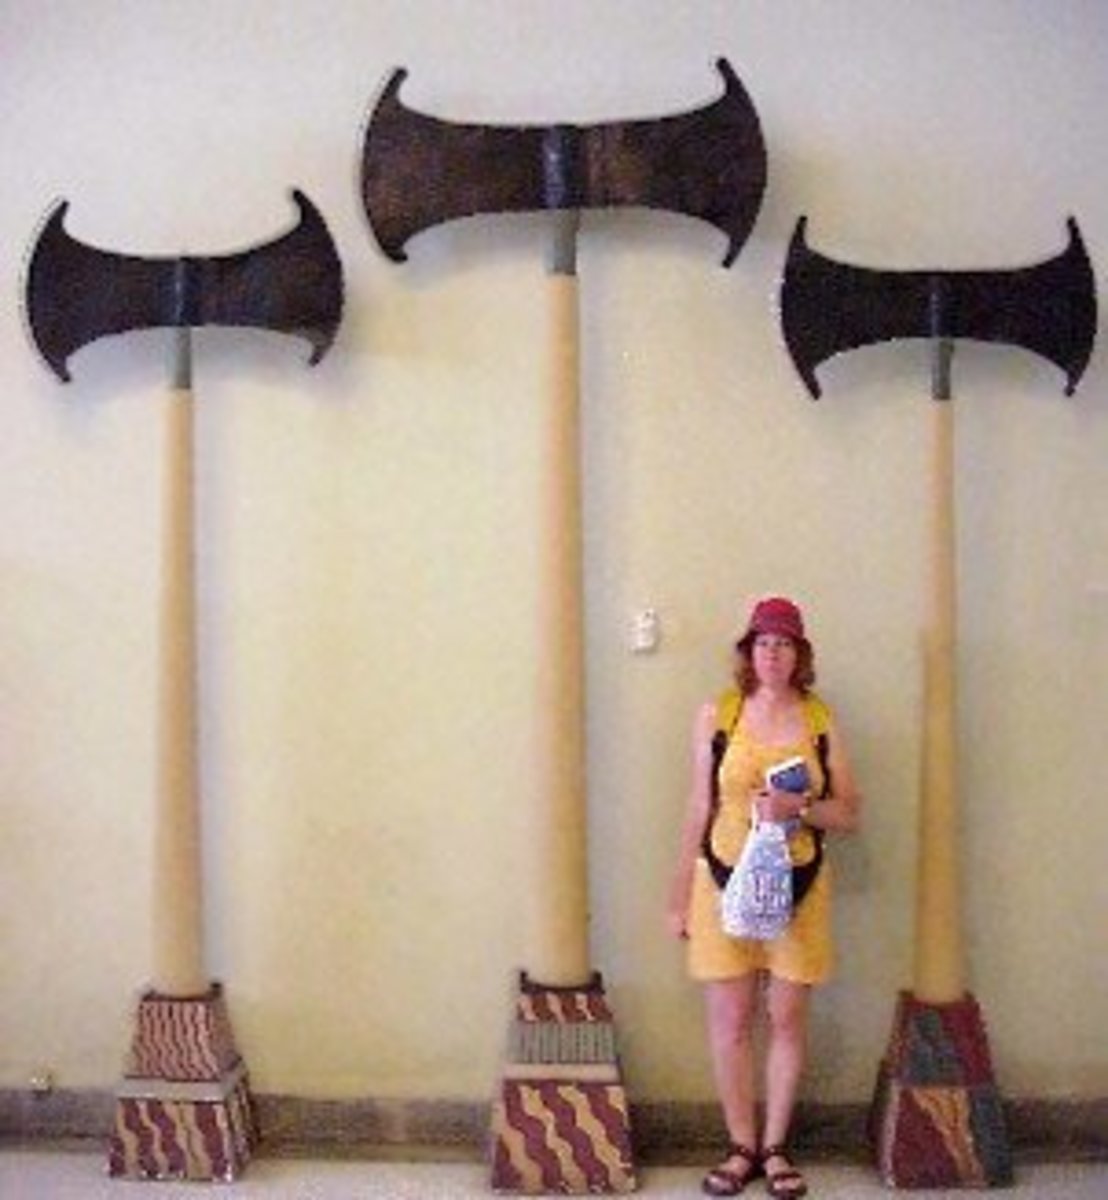 Giant Axes found in Sumer